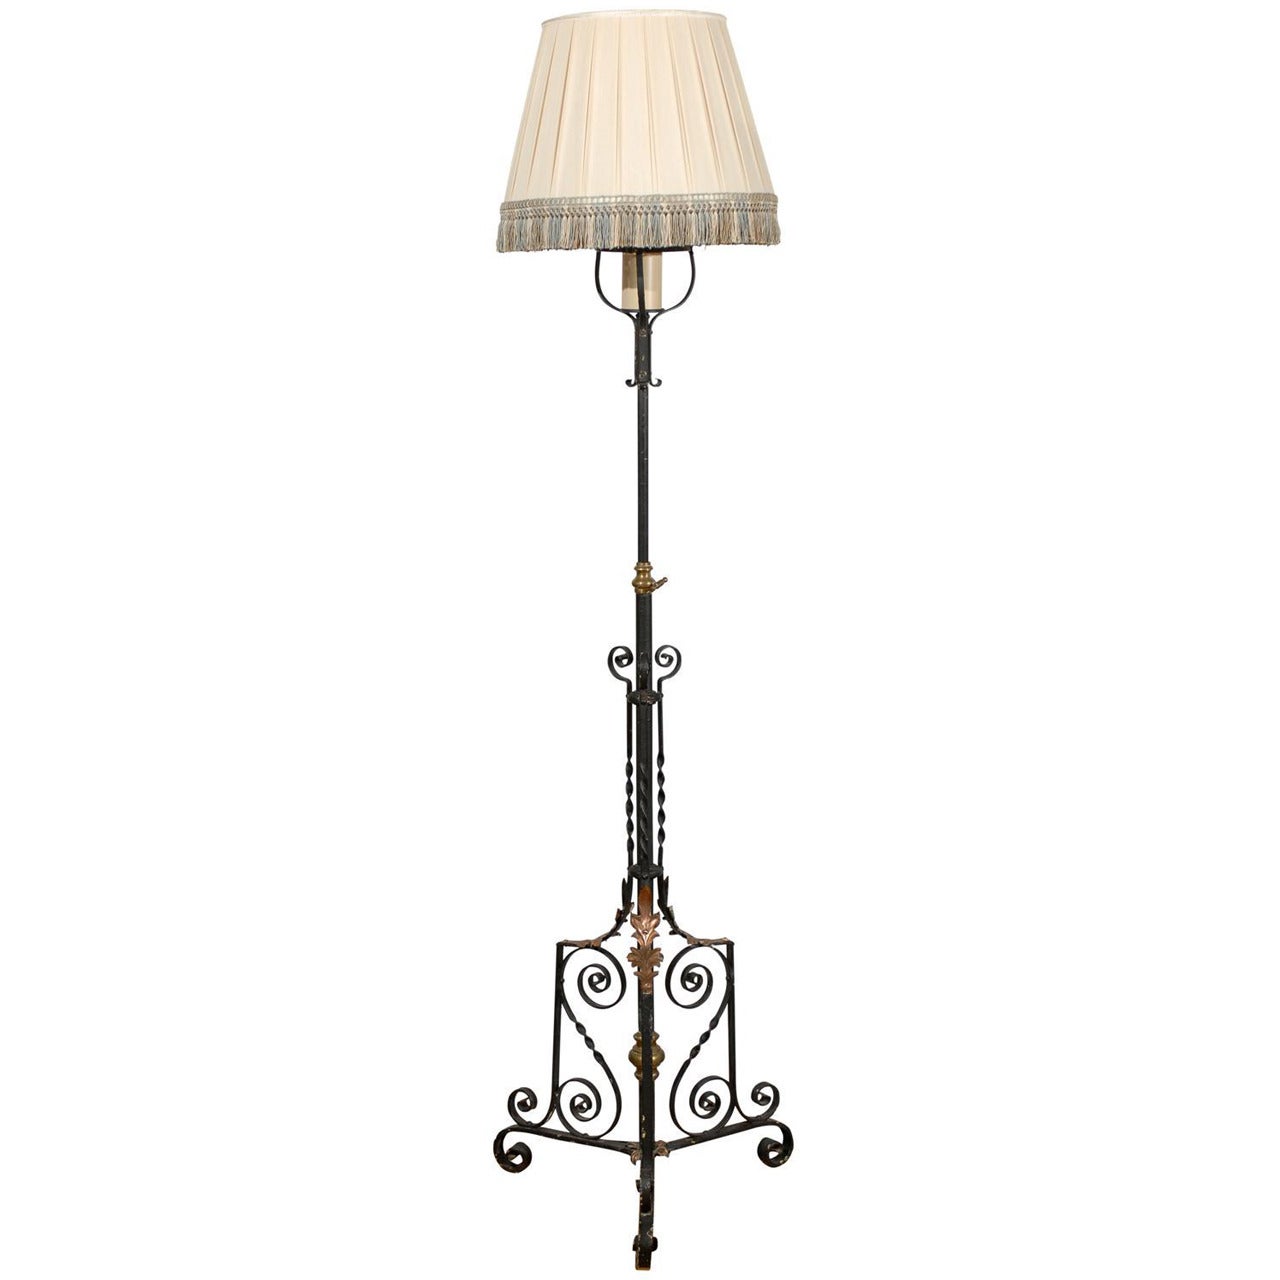 Floor Lamp with Copper Leaves and Intricate Details on Base For Sale